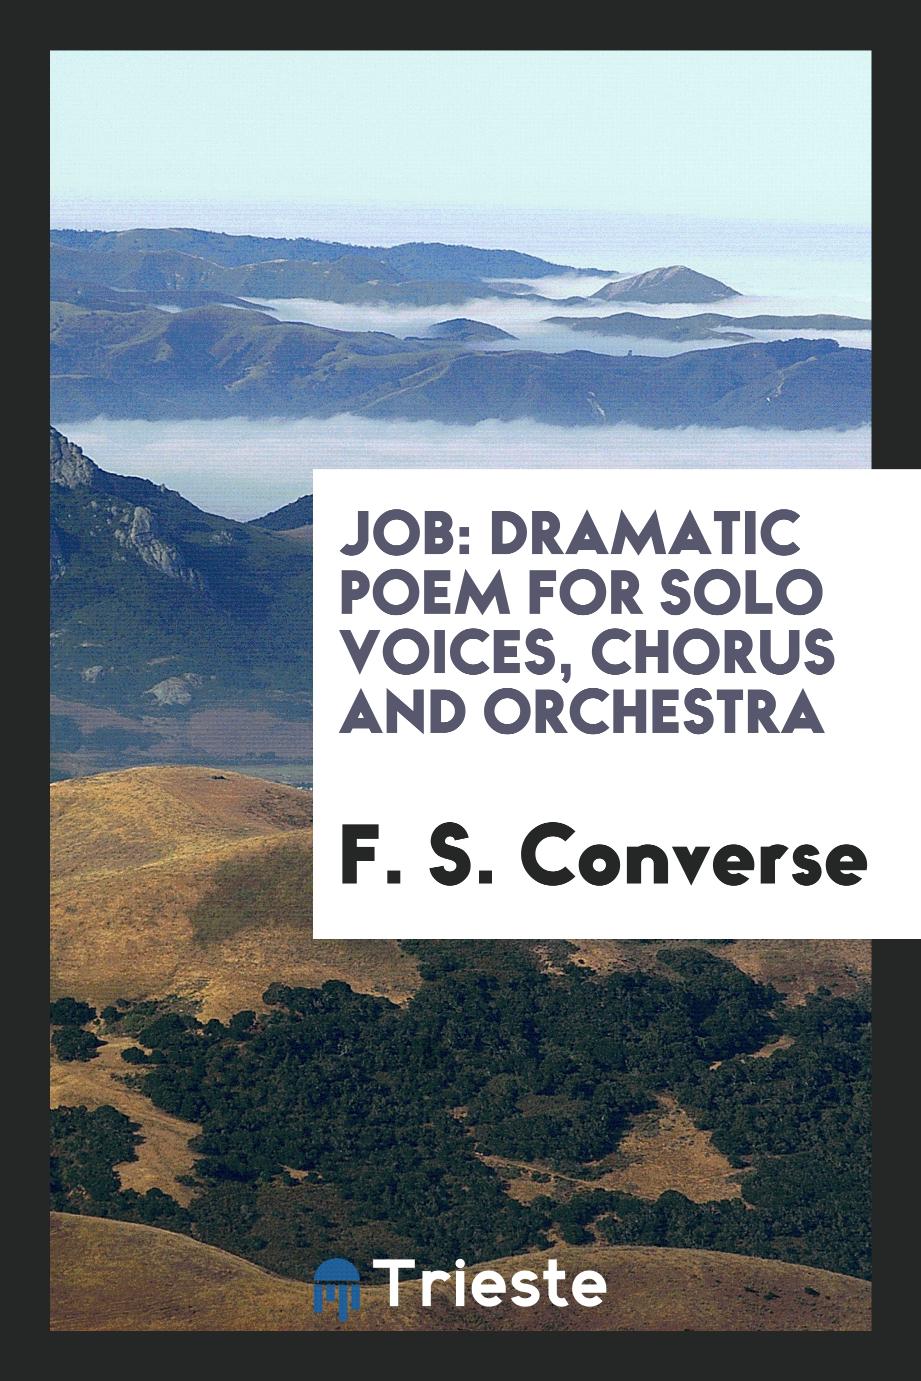 Job: Dramatic Poem for Solo Voices, Chorus and Orchestra